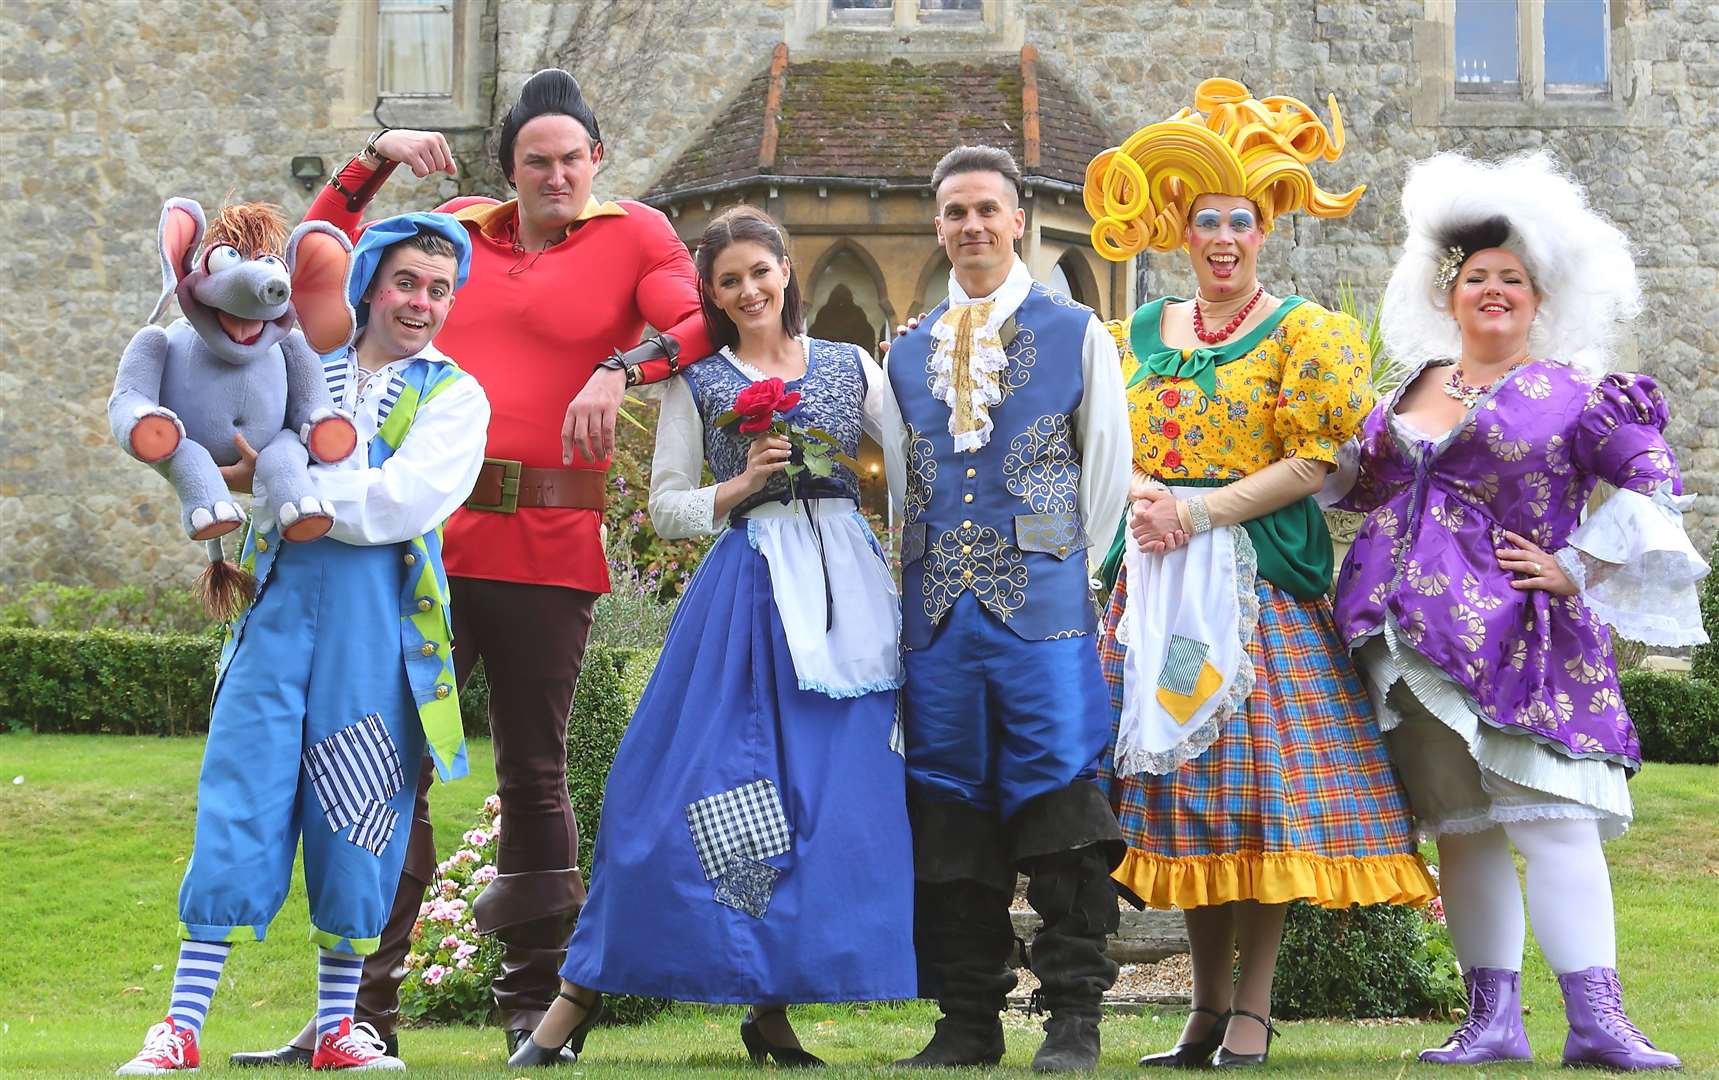 The Gravesend panto will run from Friday, December 6 to Wednesday, January 1